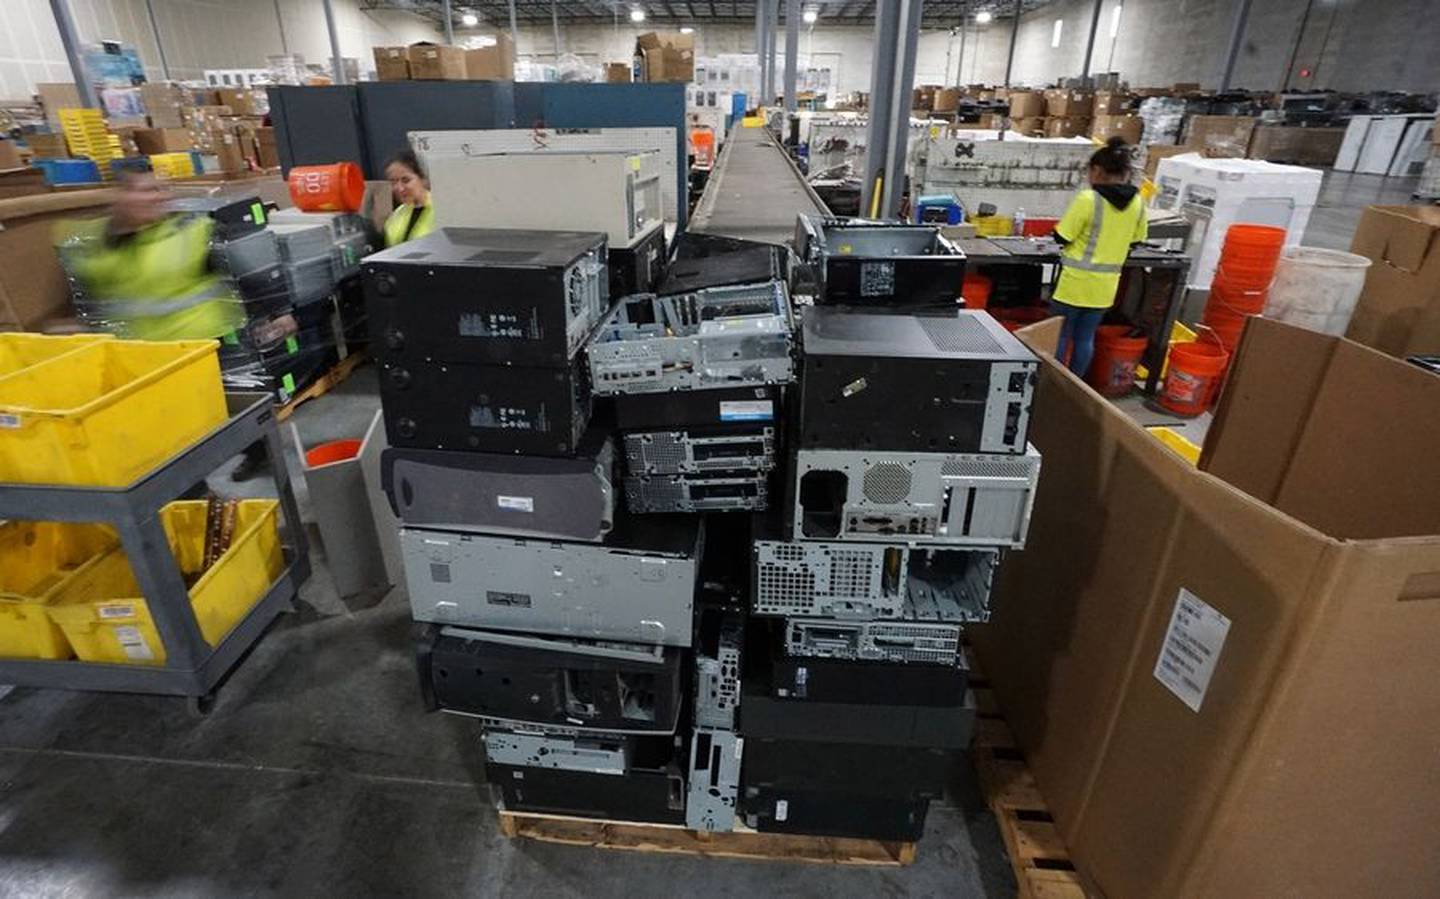 Steel computer chassis are stacked after being disassembled by Elgin Recycling workers at the company's electronics recycling processing facility in West Dundee.